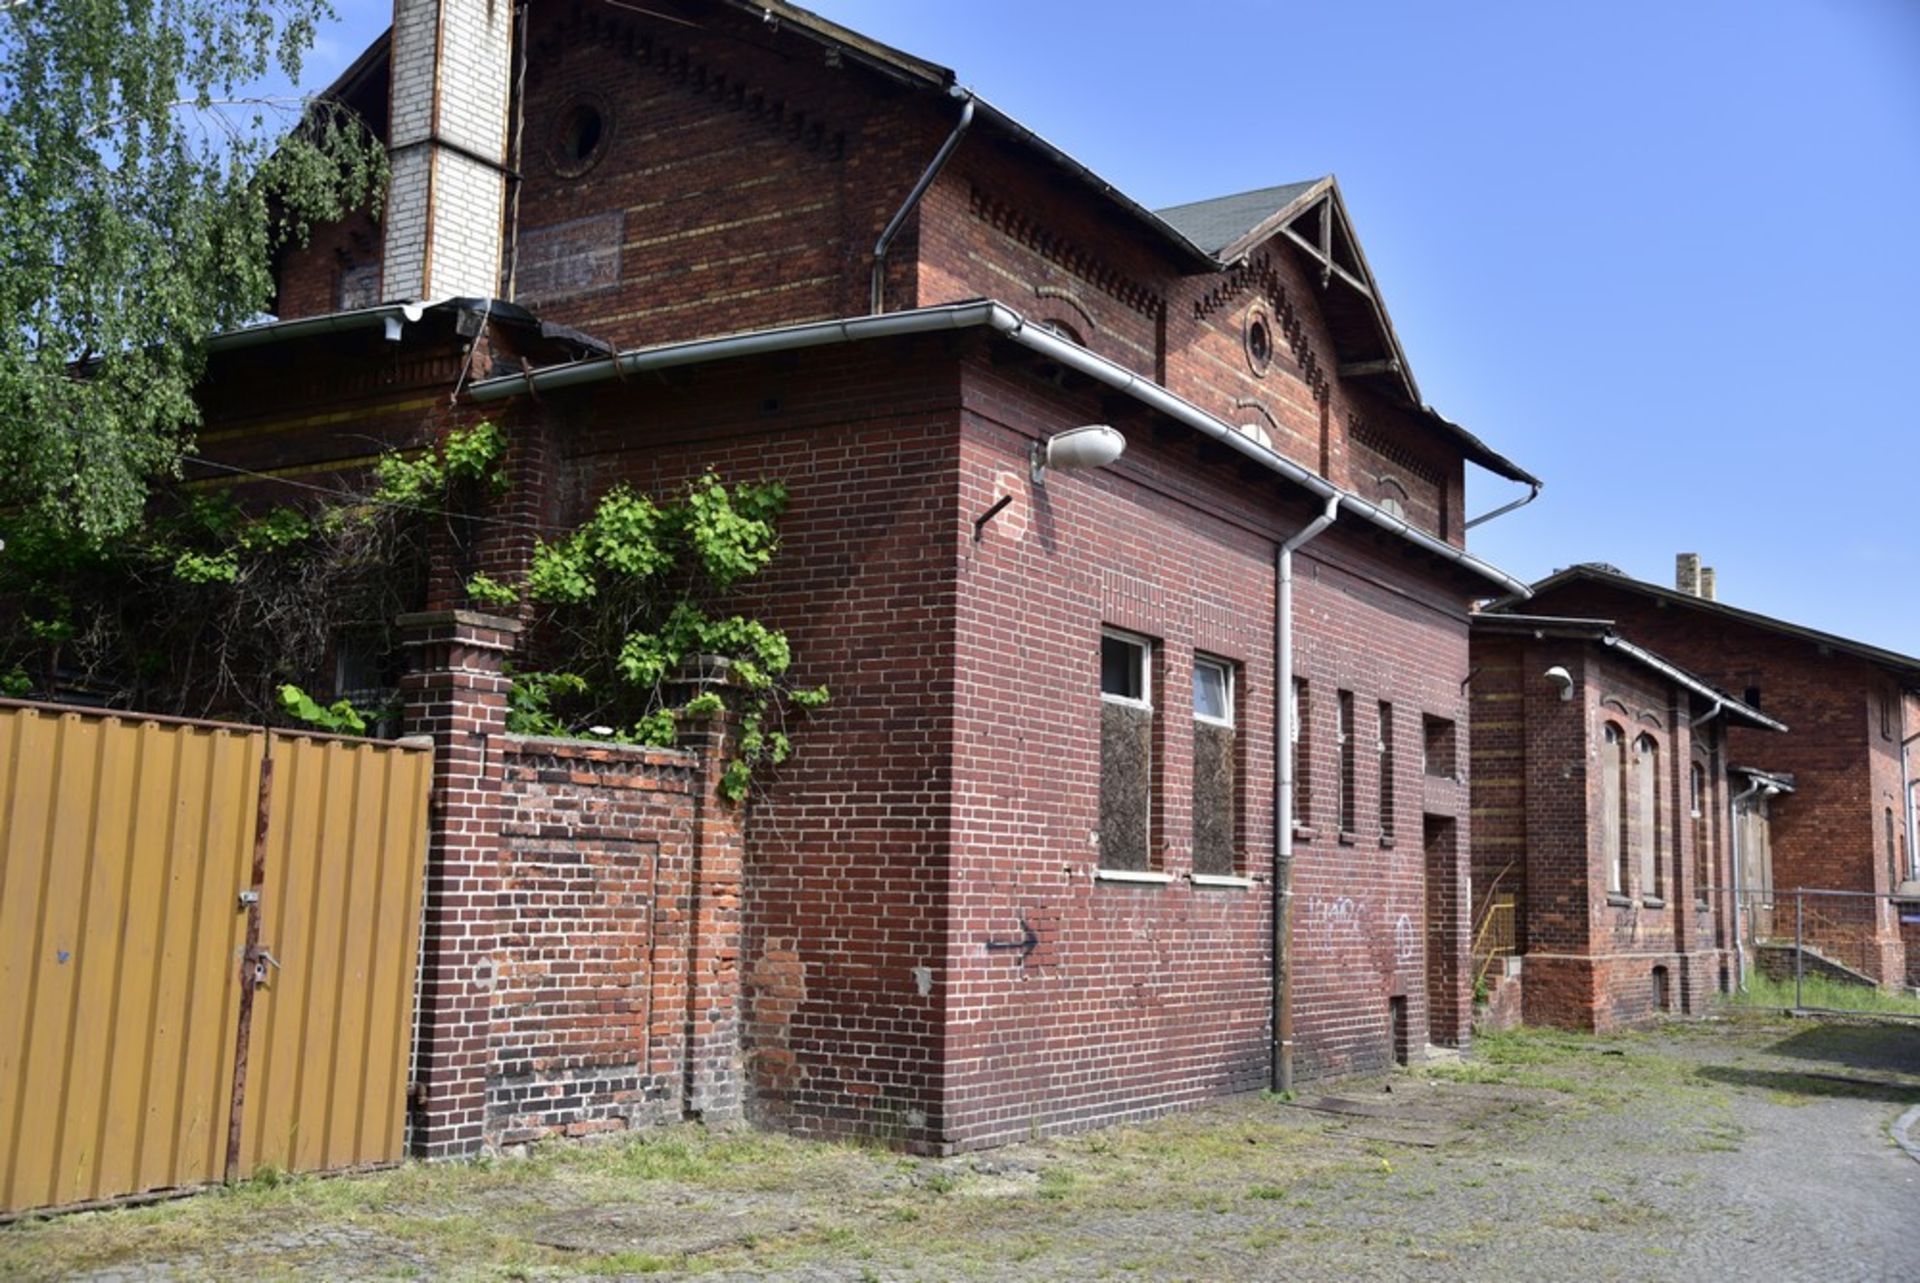 STATION HOUSE, GOODS SHED, OVER ONE ACRE Tangerhütte, Saxony, Germany,